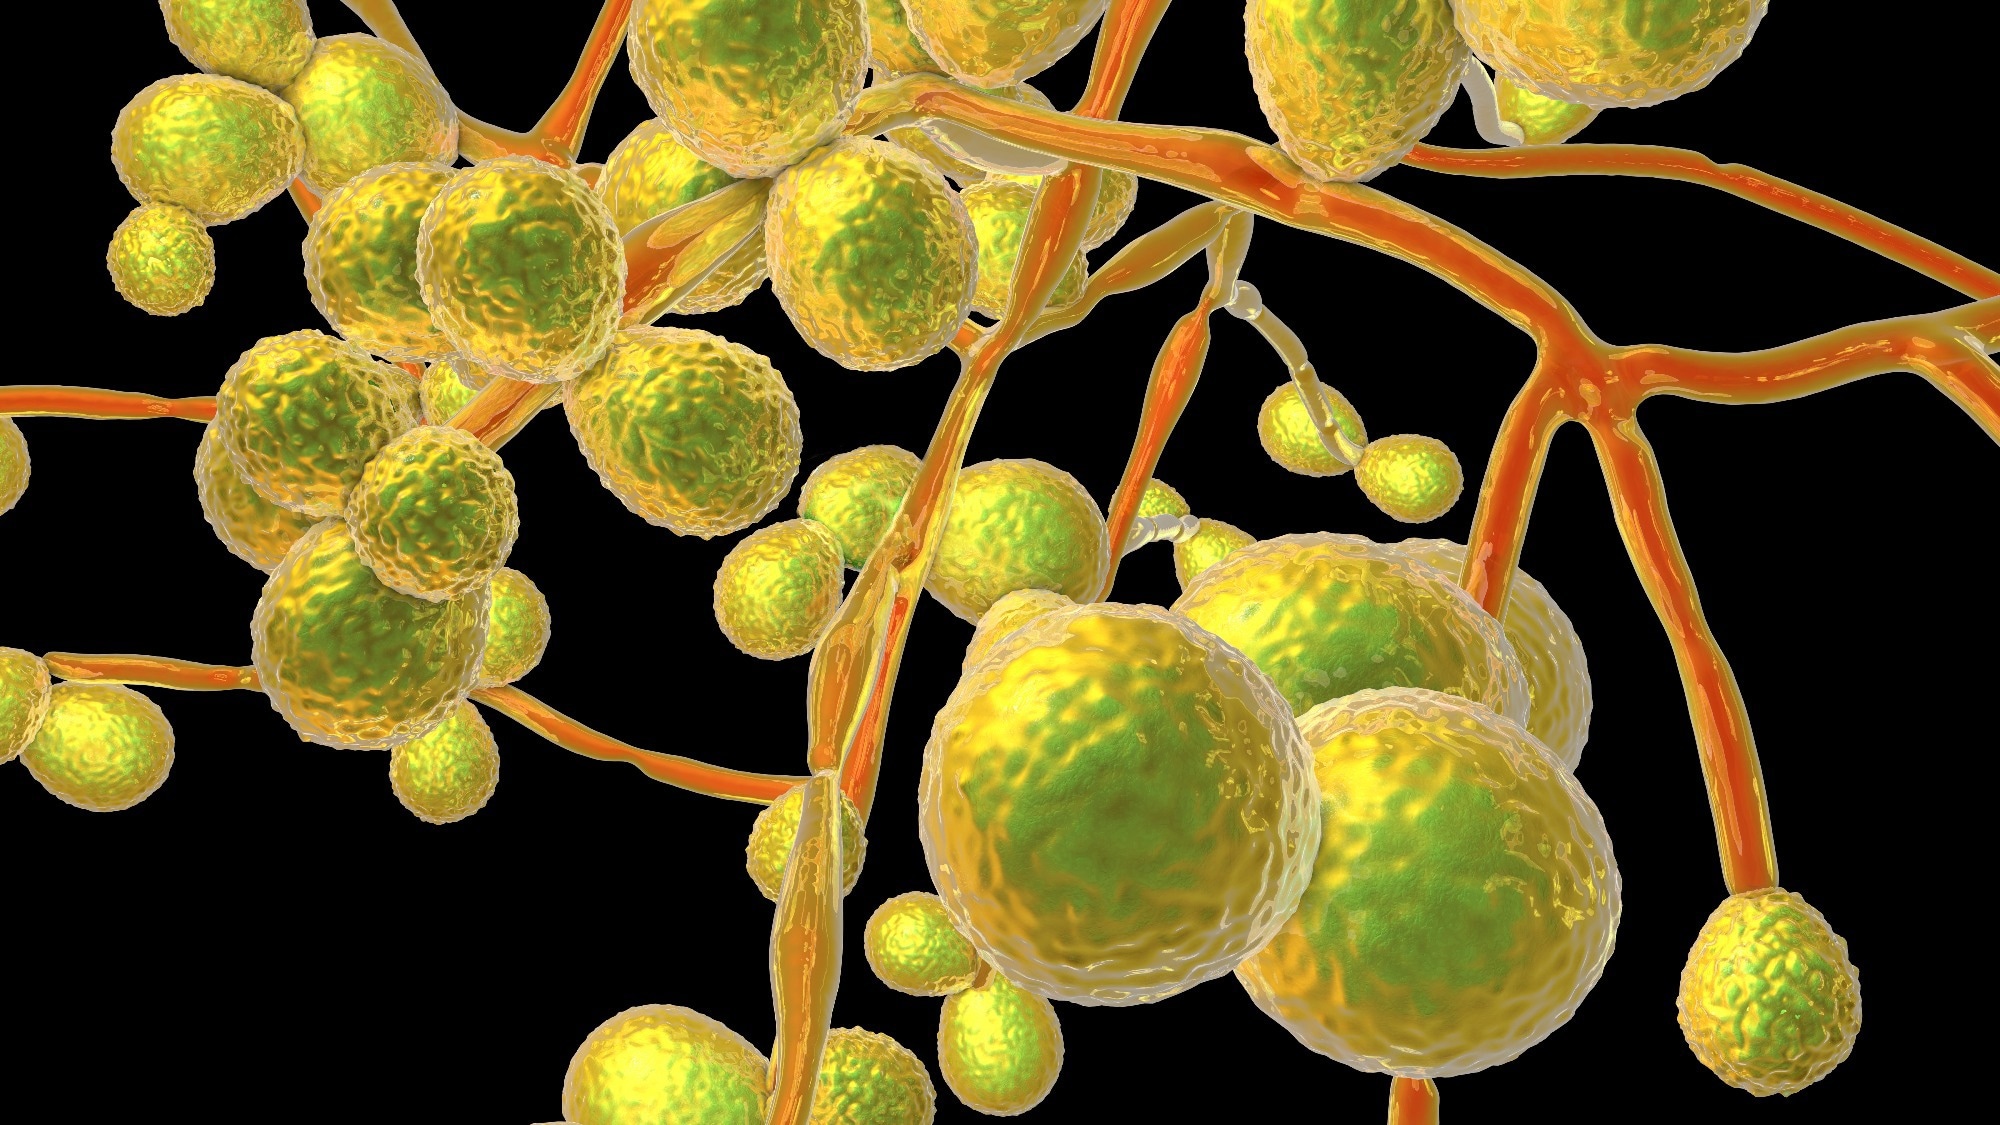 Study: Candida auris evades innate immunity by using metabolic strategies to escape and kill macrophages while avoiding antimicrobial inflammation. Image Credit: Kateryna Kon / Shutterstock